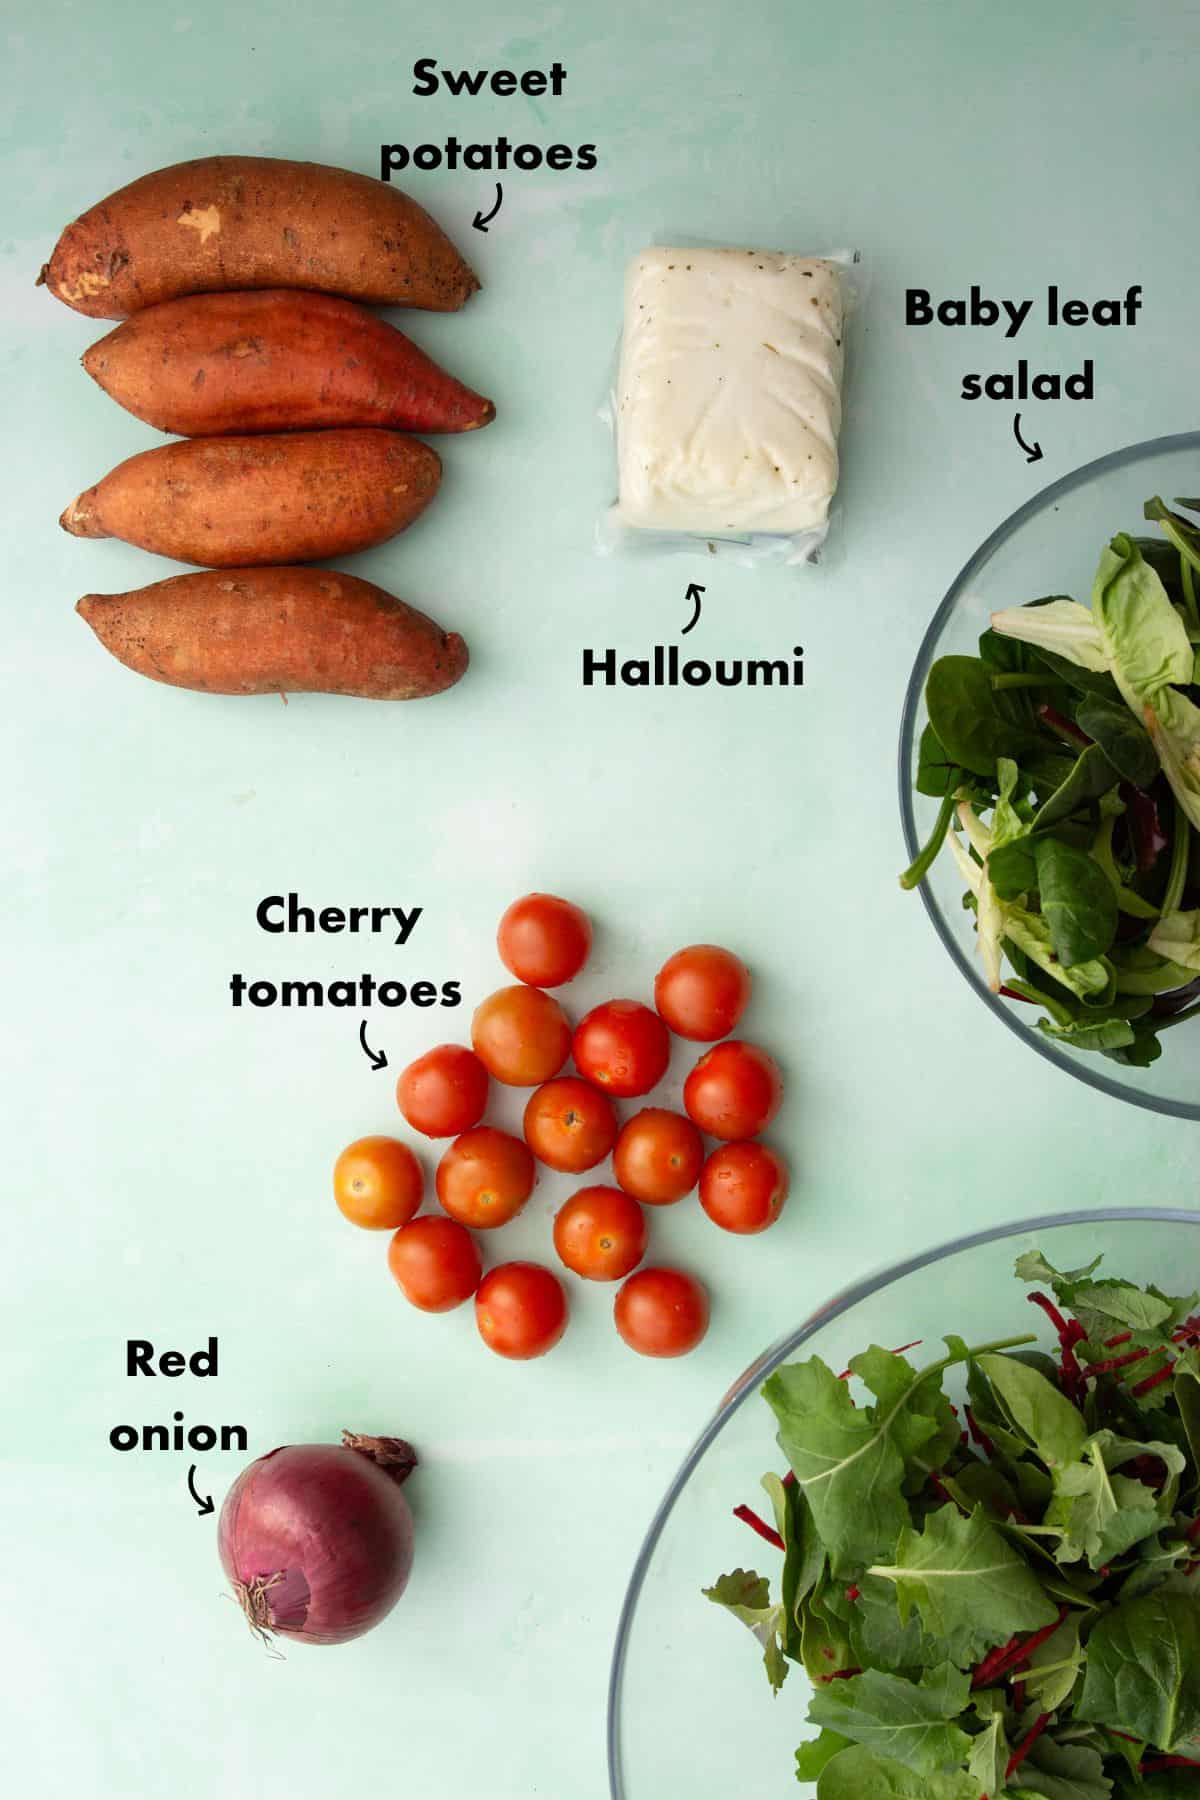 Ingredients to make a halloumi salad laid out on a pale blue background and labelled.